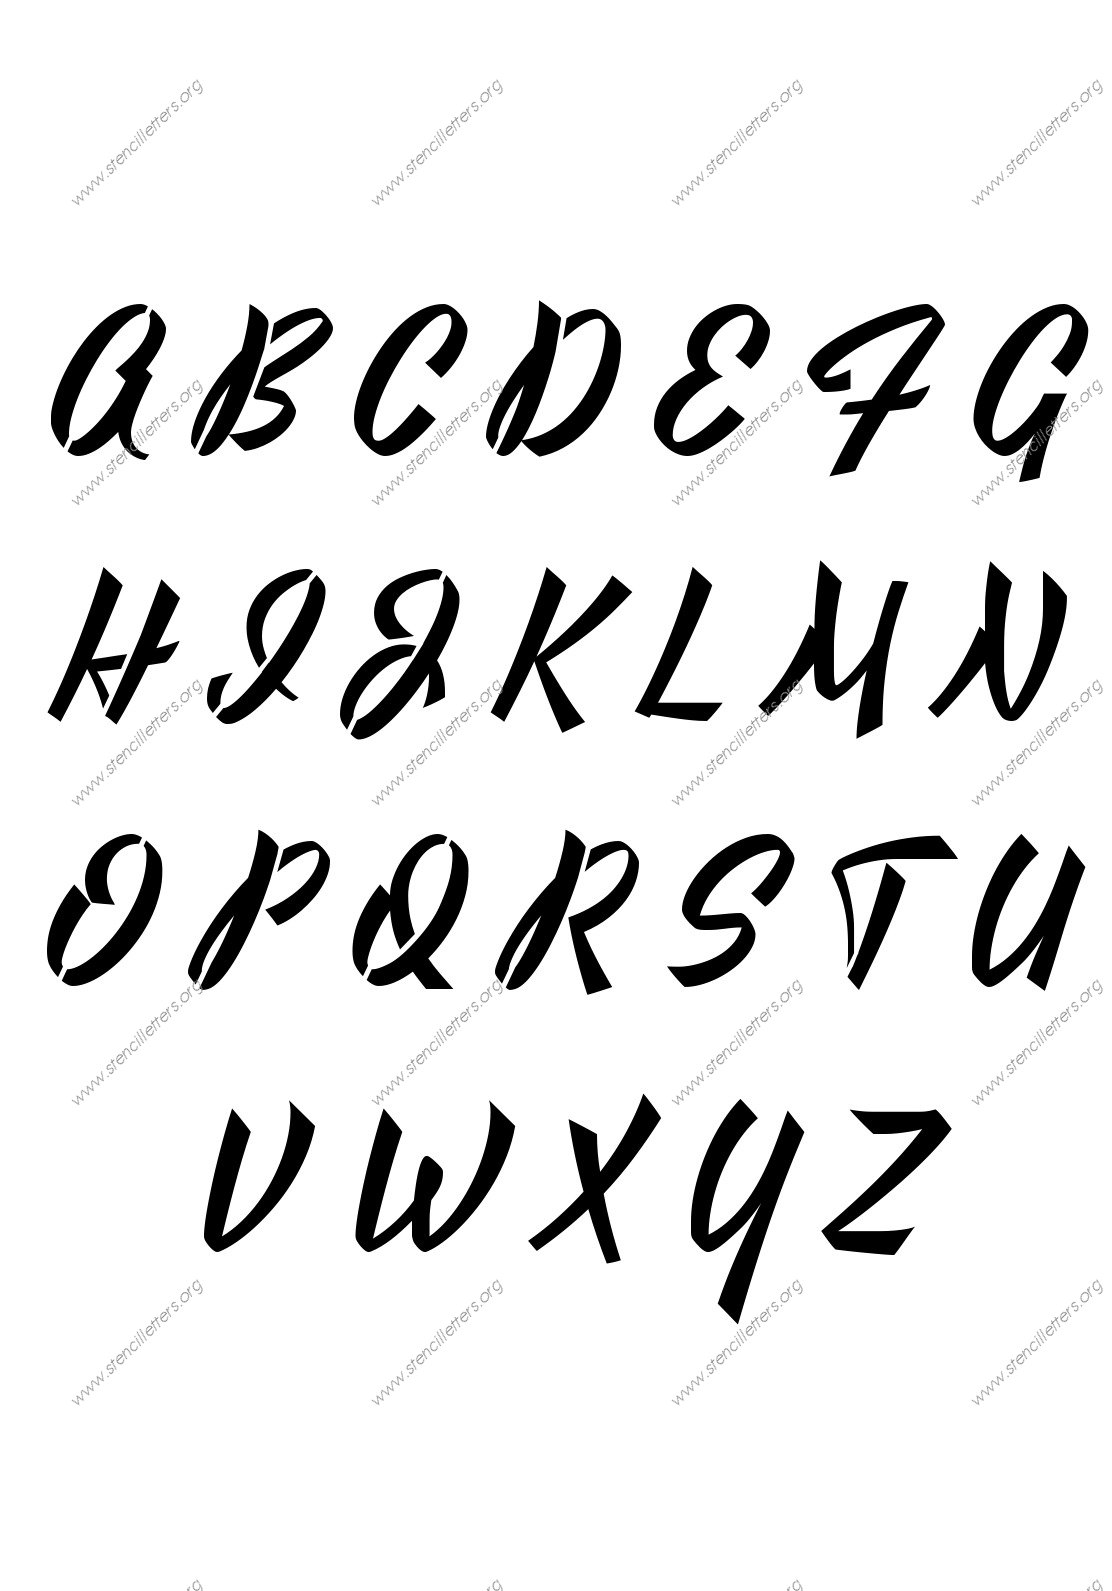 1940s Brushed Cursive A to Z uppercase letter stencils